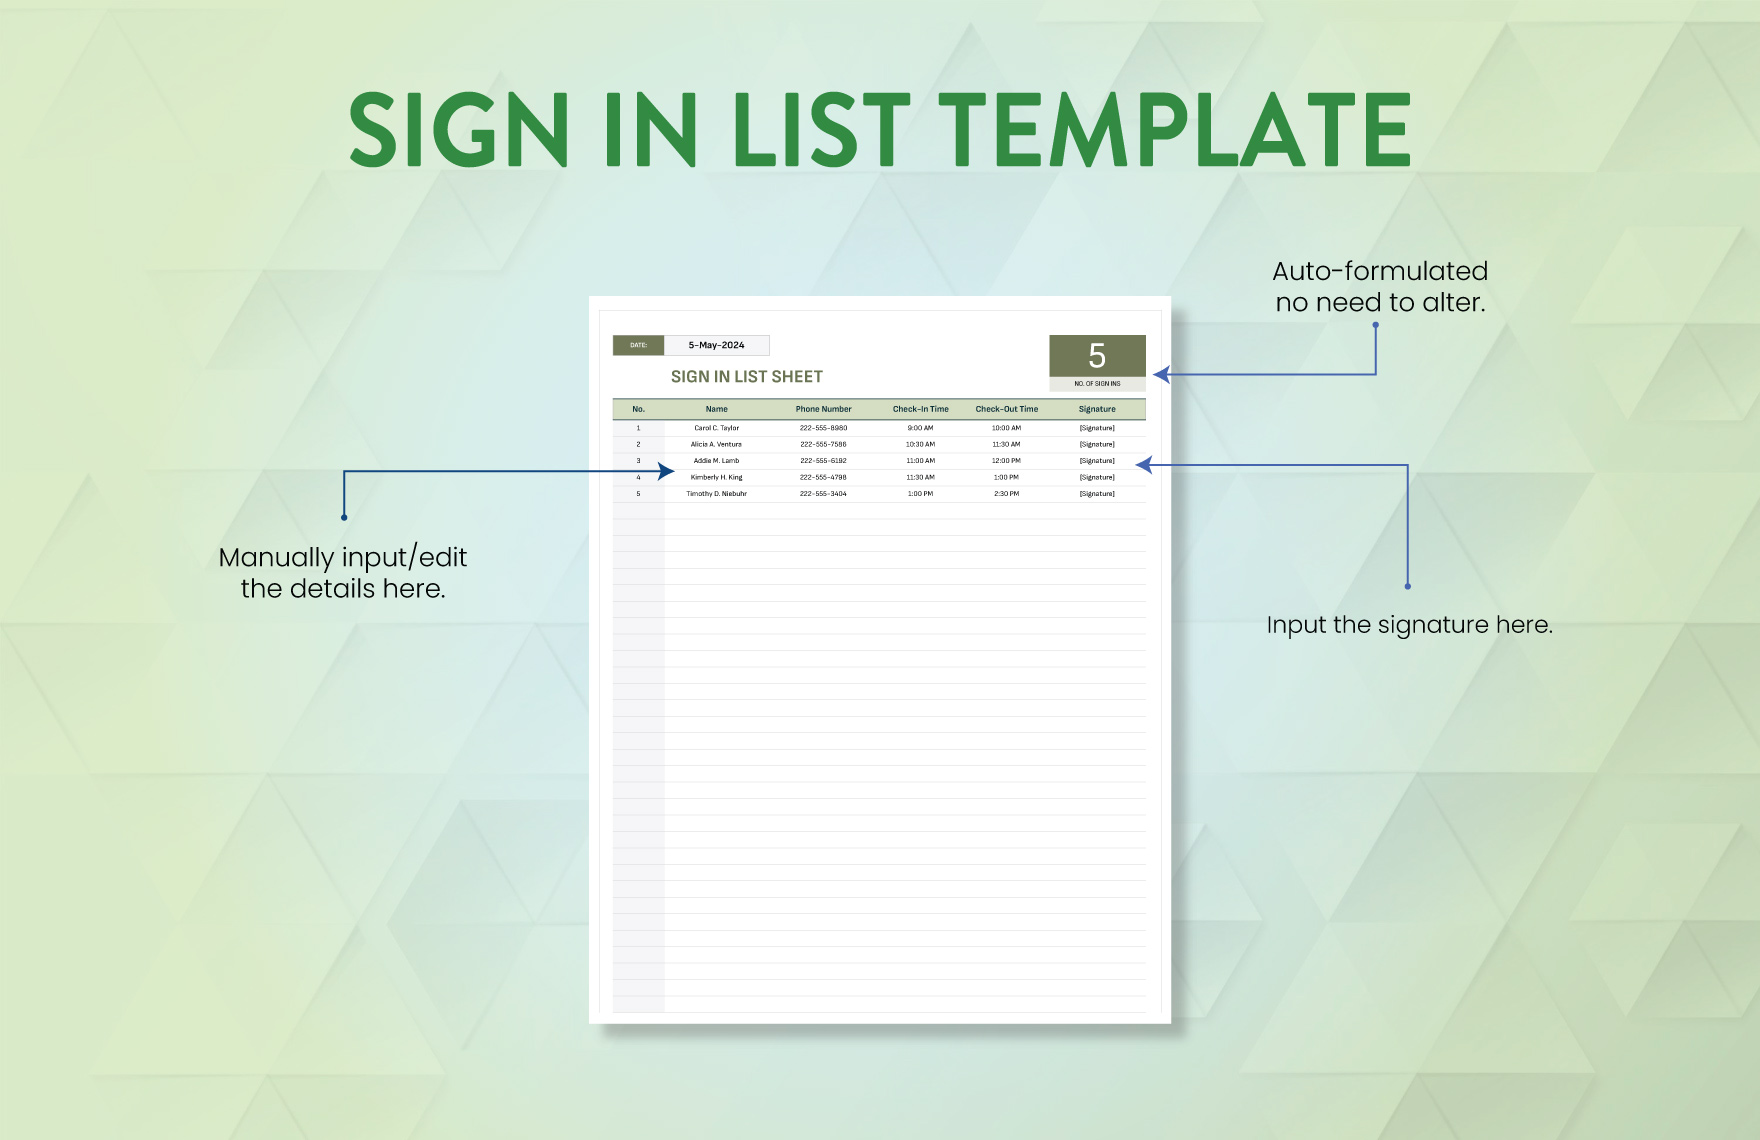 Sign in List Template